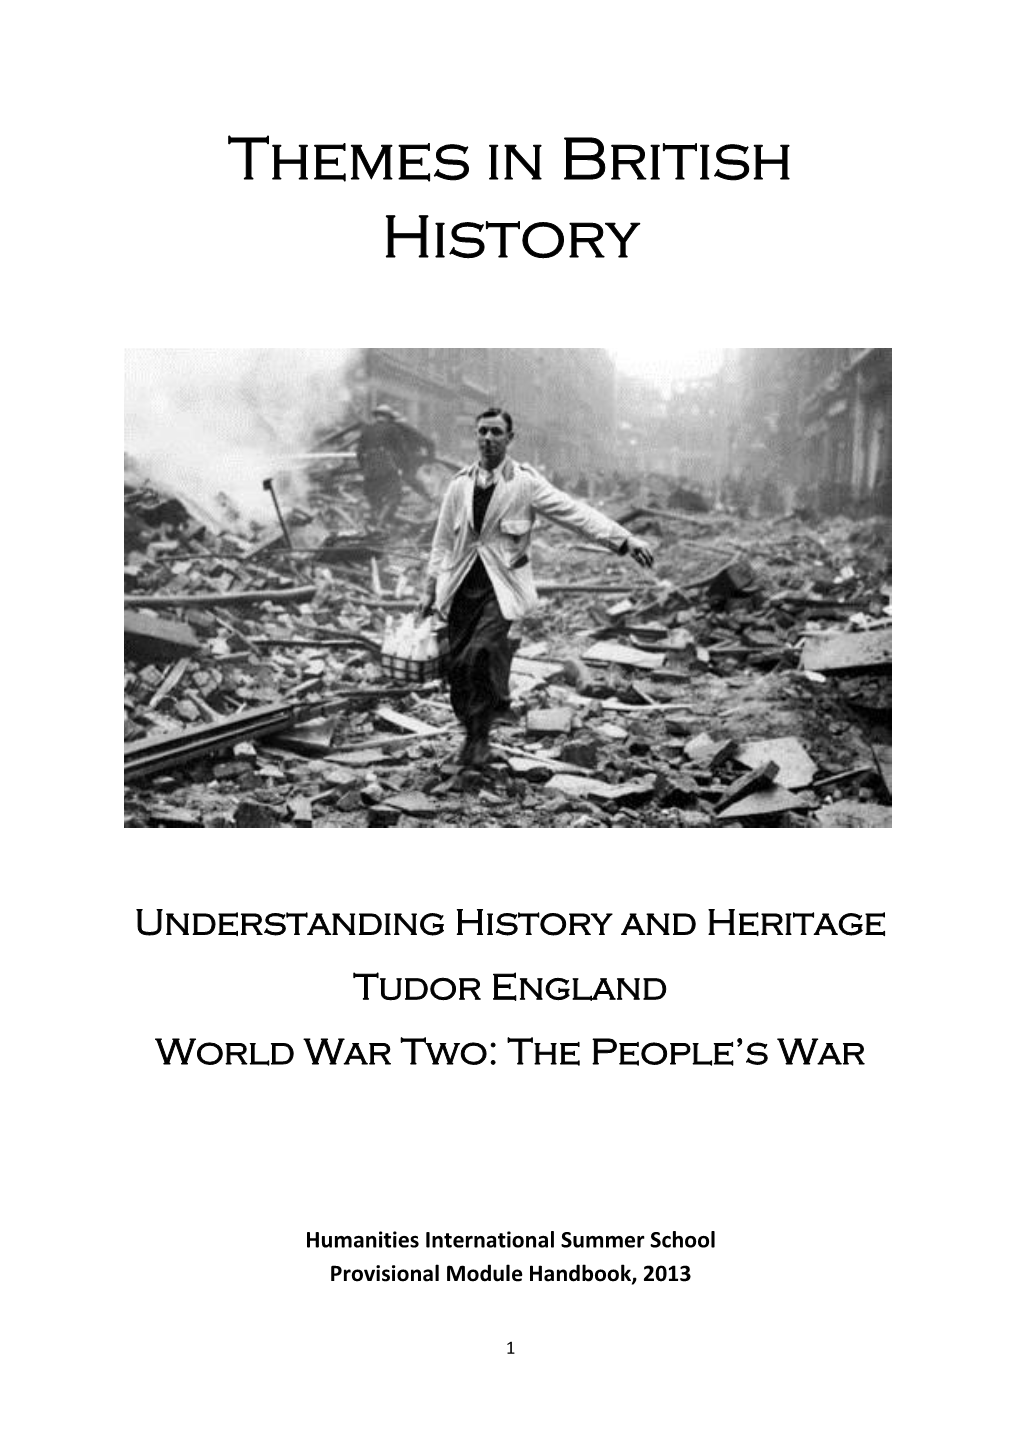 Themes in British History